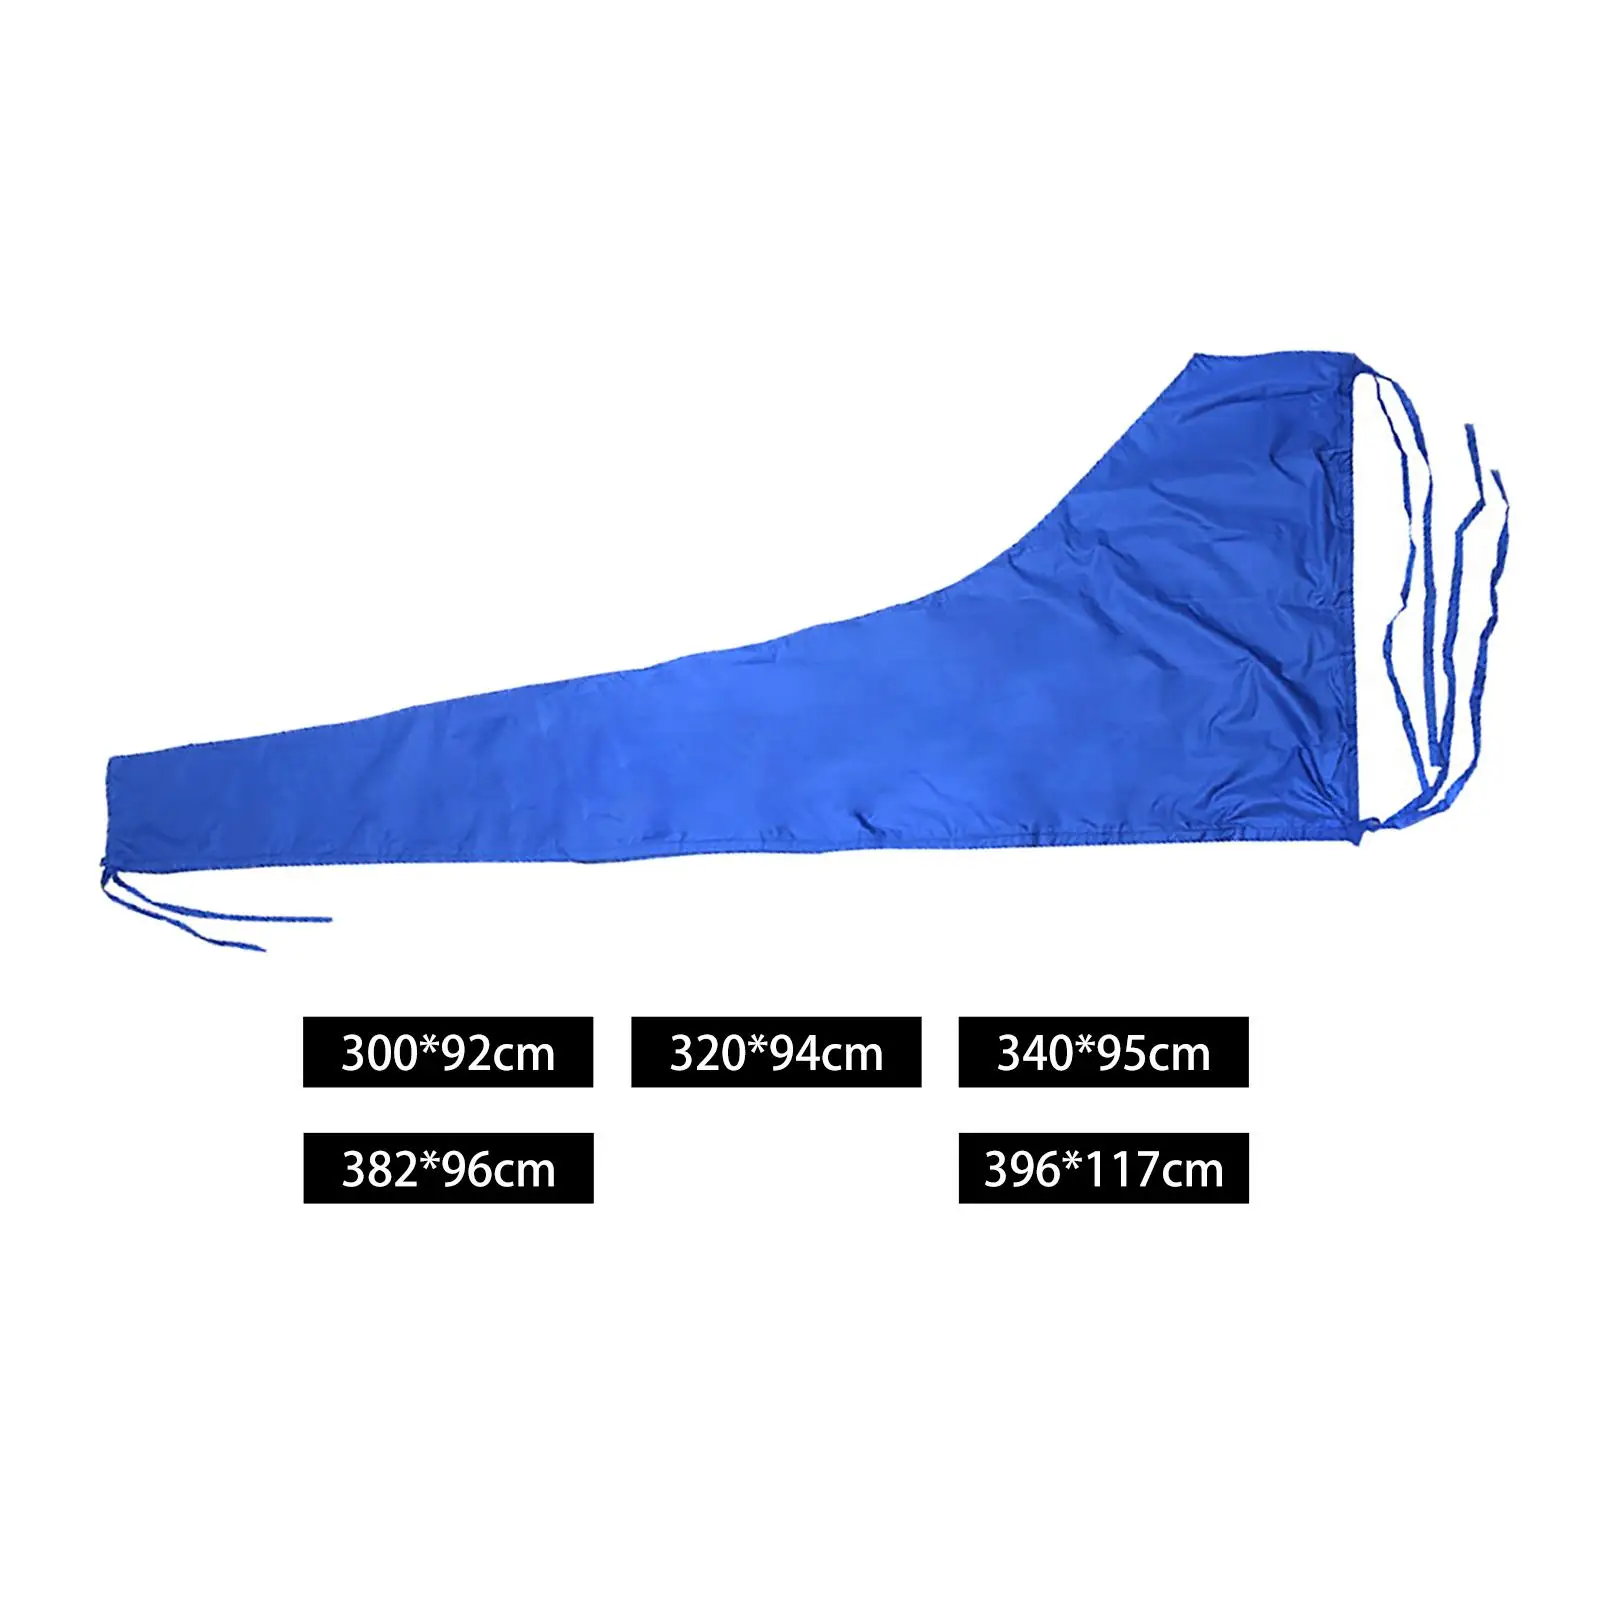 Waterproof 600D Mainsail Boom Cover Adjustable Strap PU Coated Boat Cover